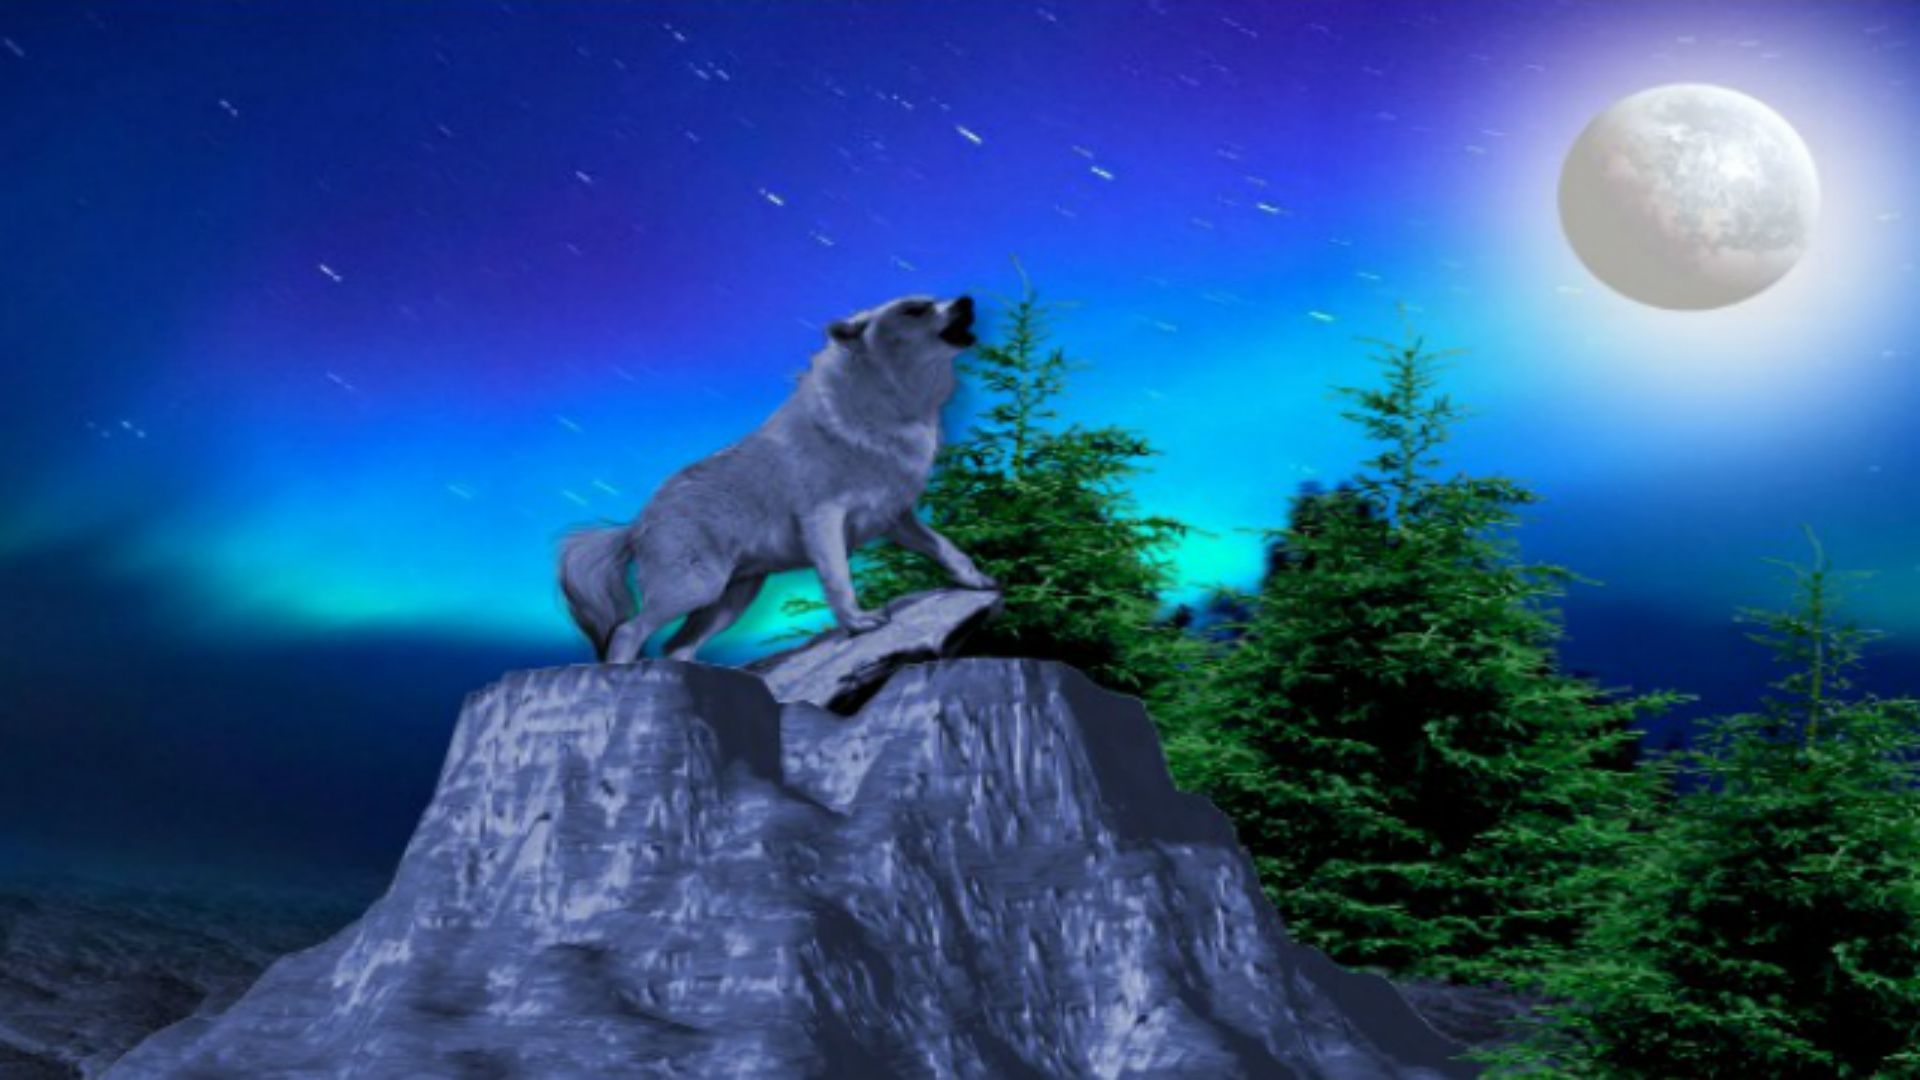 Download Wolf Howling At The Moon Desktop Background #oyy91 Free